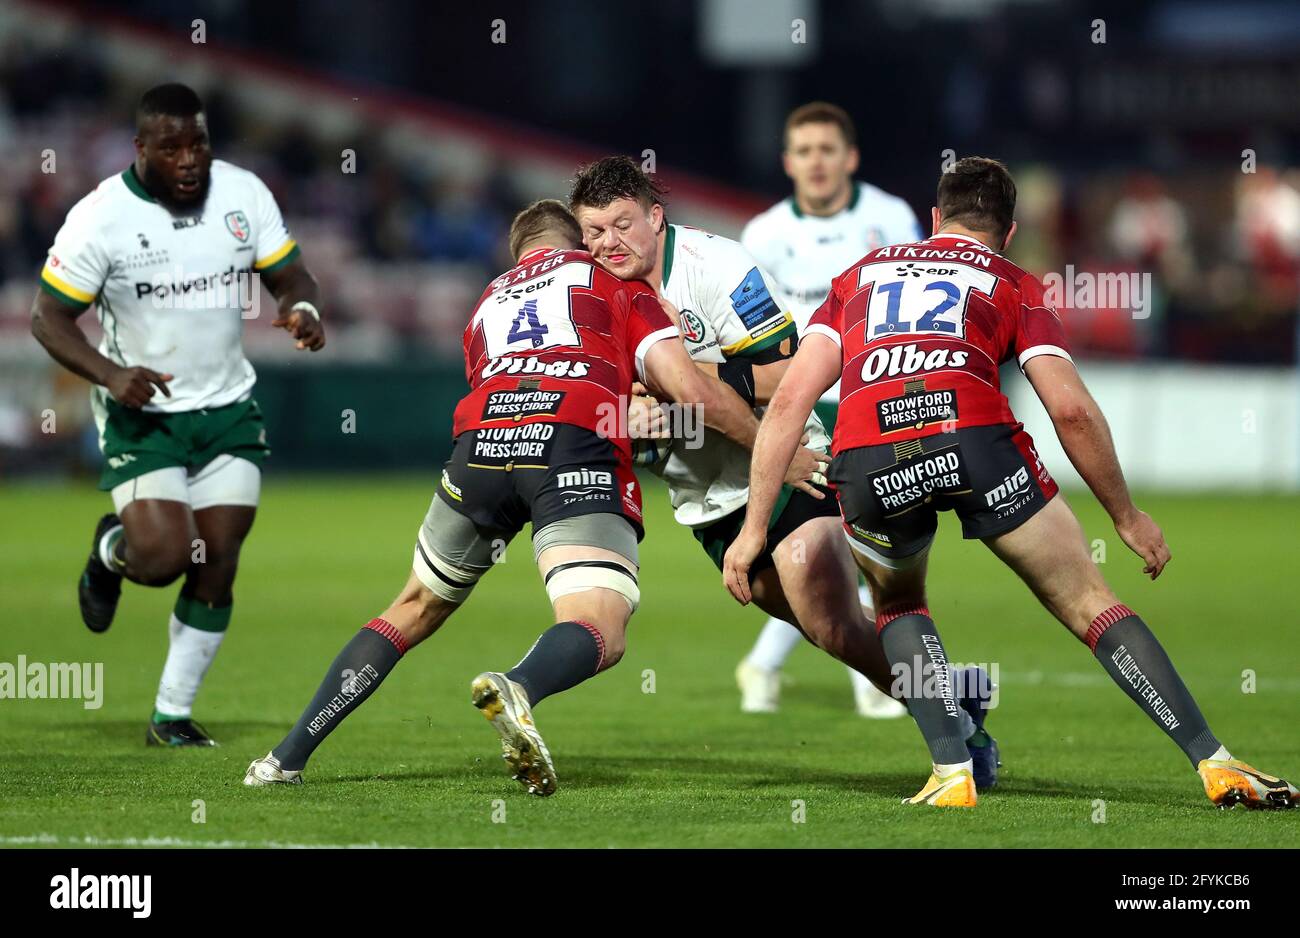 London Irish's Will Goodrick-Clarke is tackled by Gloucester's Ed Slater during the Gallagher Premiership match at the Kingsholm Stadium, Gloucester. Picture date: Friday May 28, 2021. Stock Photo